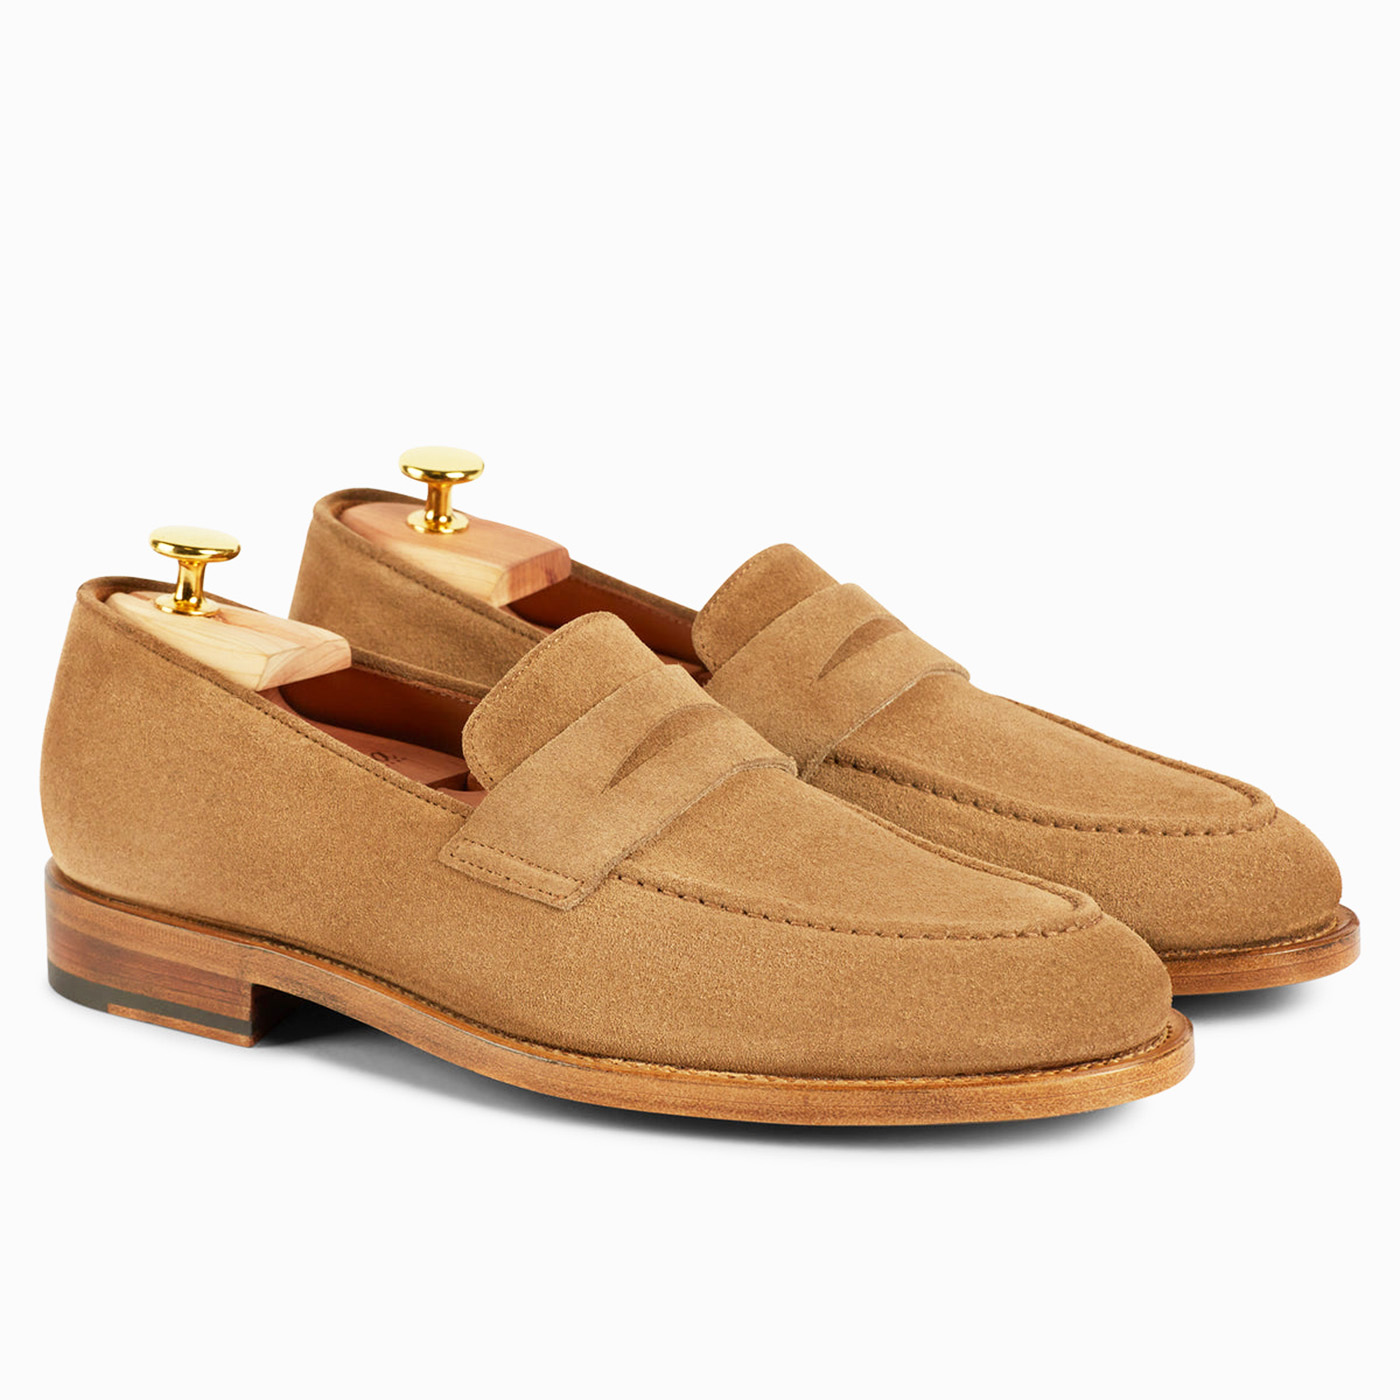 penny loafers (4)